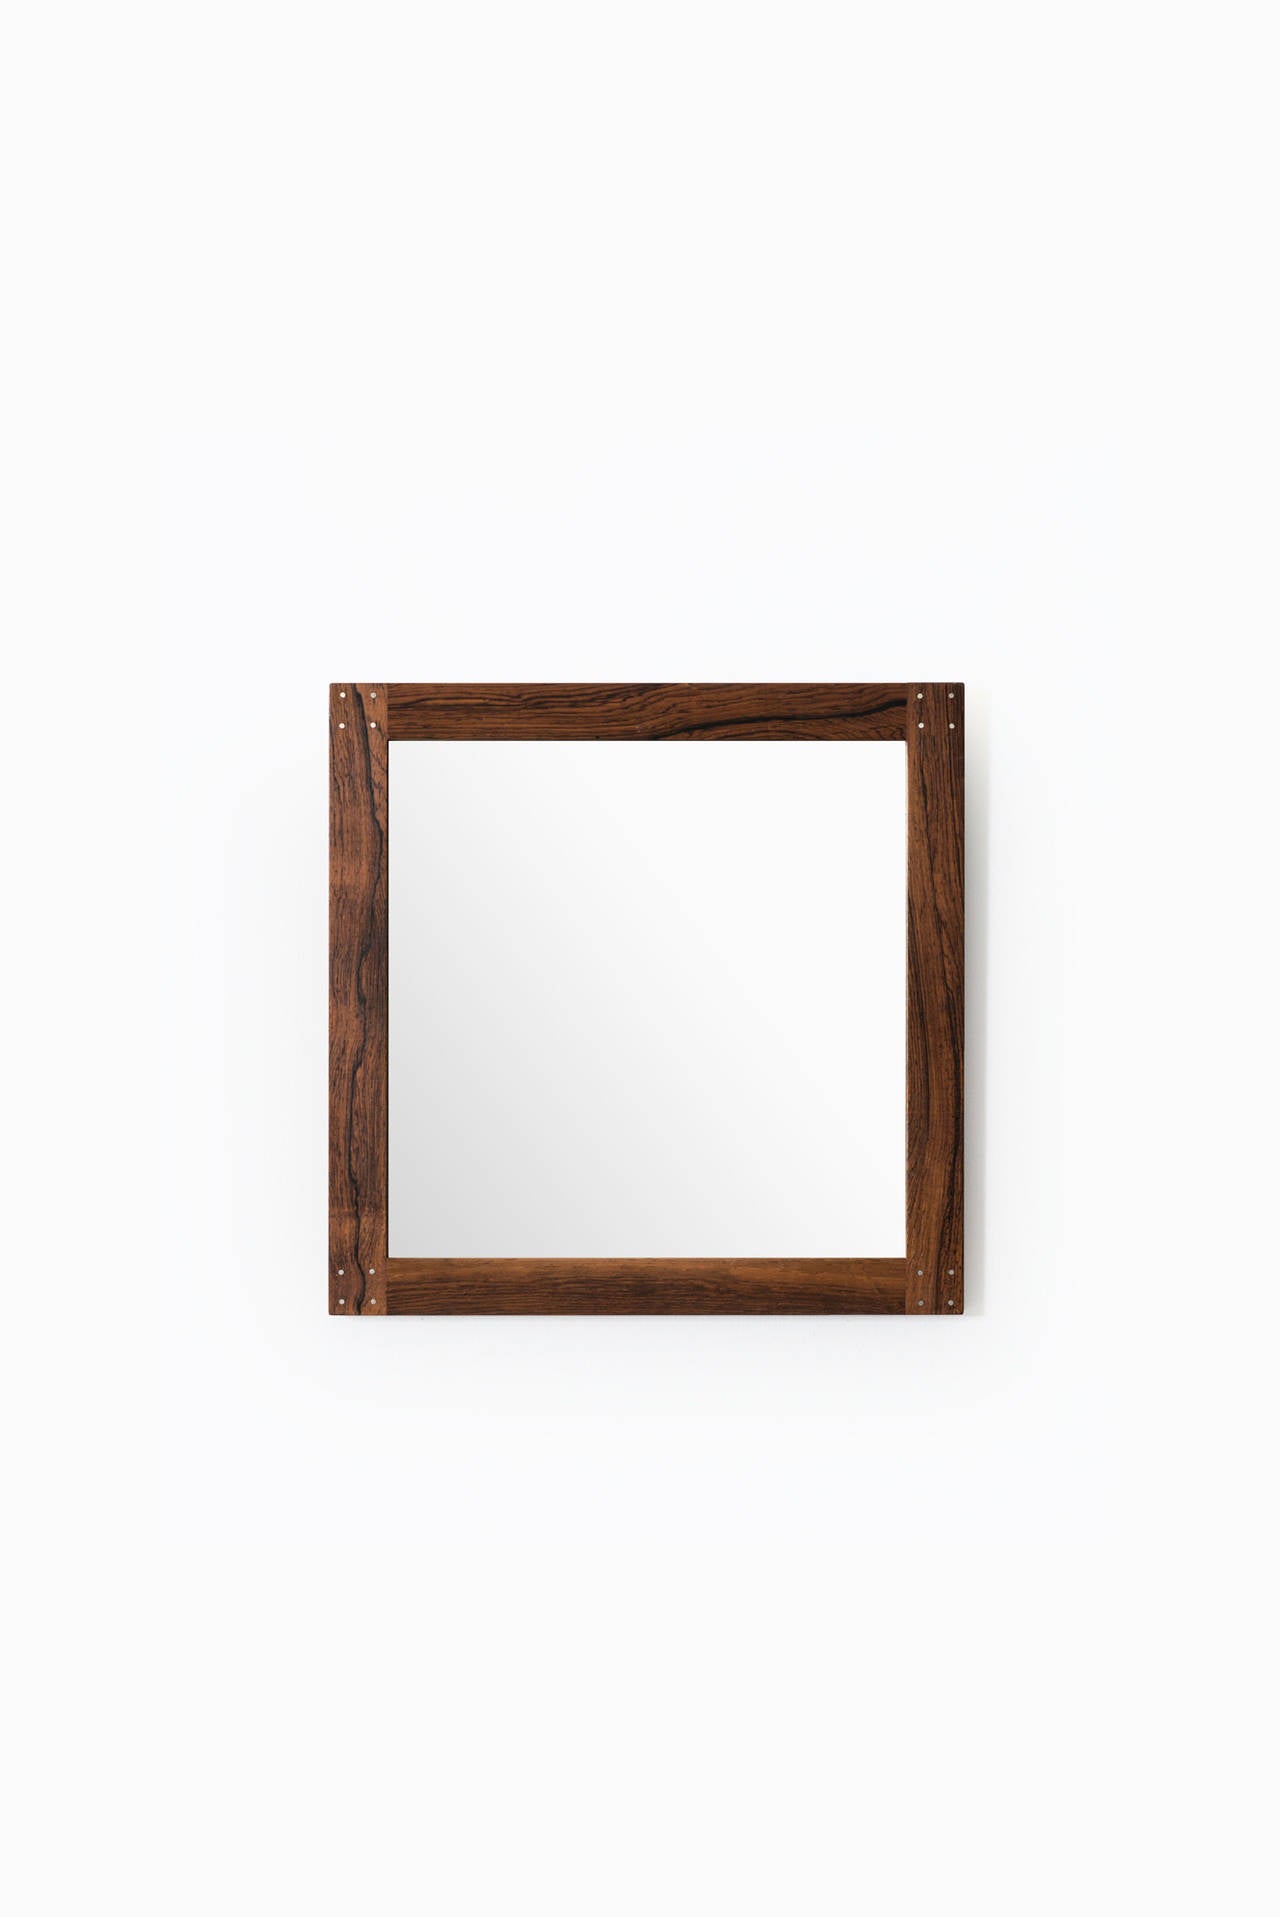 Rare mirrors in rosewood and nice silver detail designed by Uno & Östen Kristiansson. Produced by Luxus in Vittsjö, Sweden.